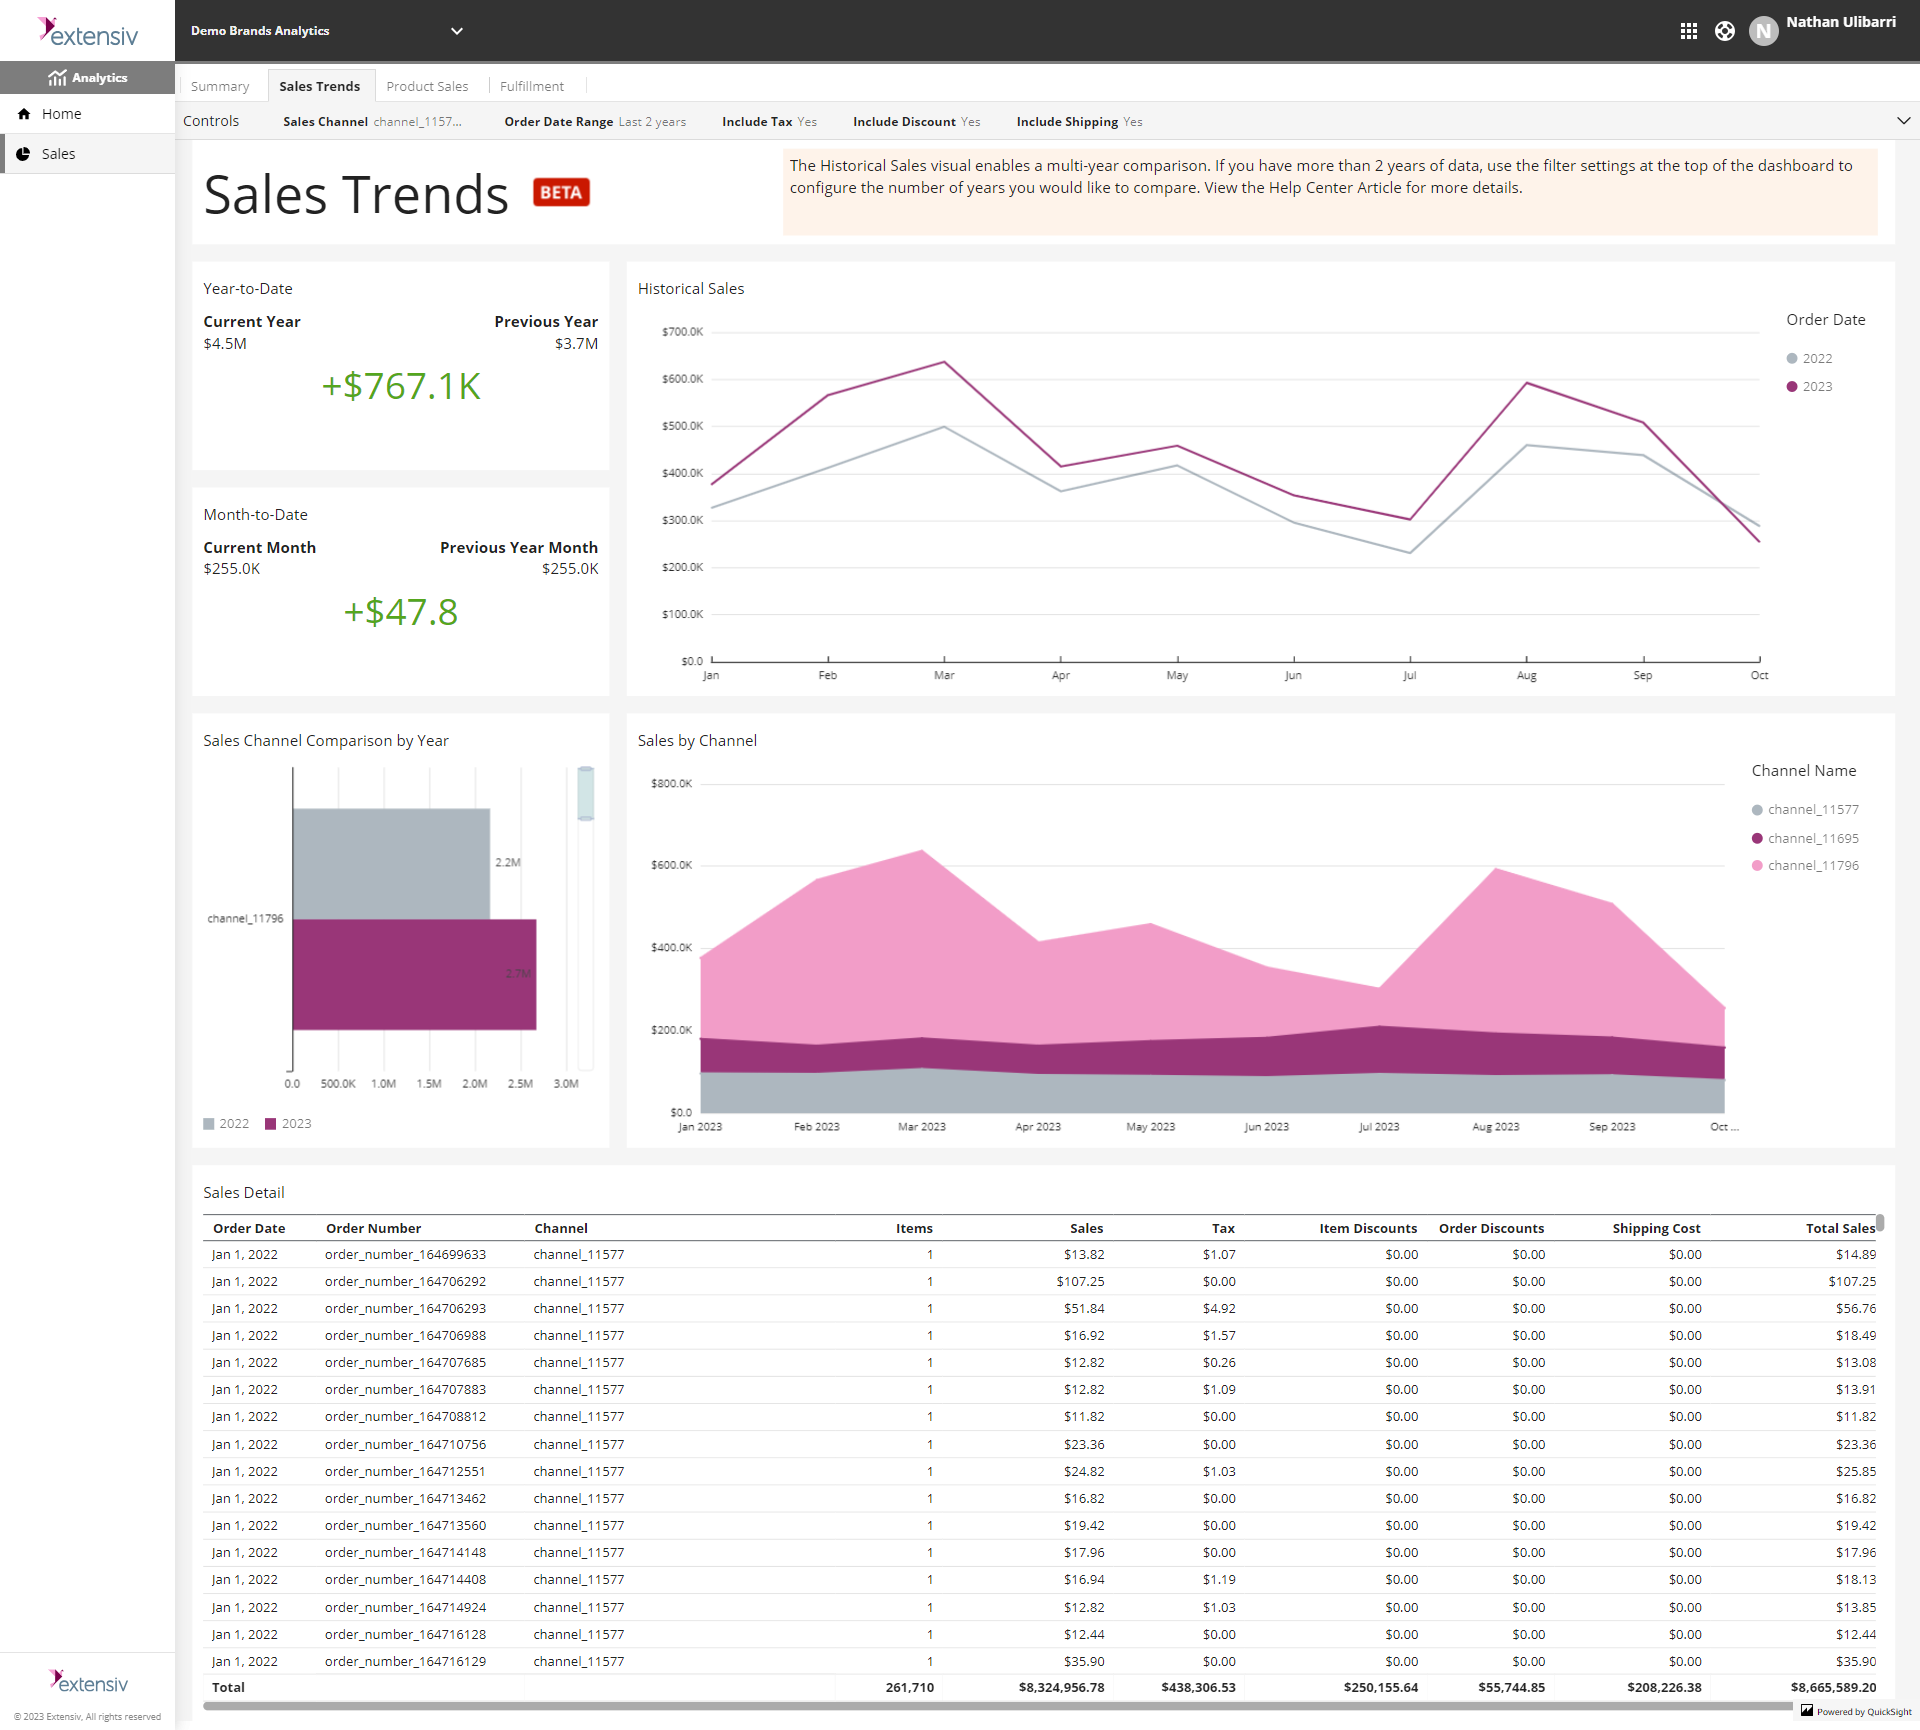 Sales Analytics_Sales Trends-screen-Data Details and Filters